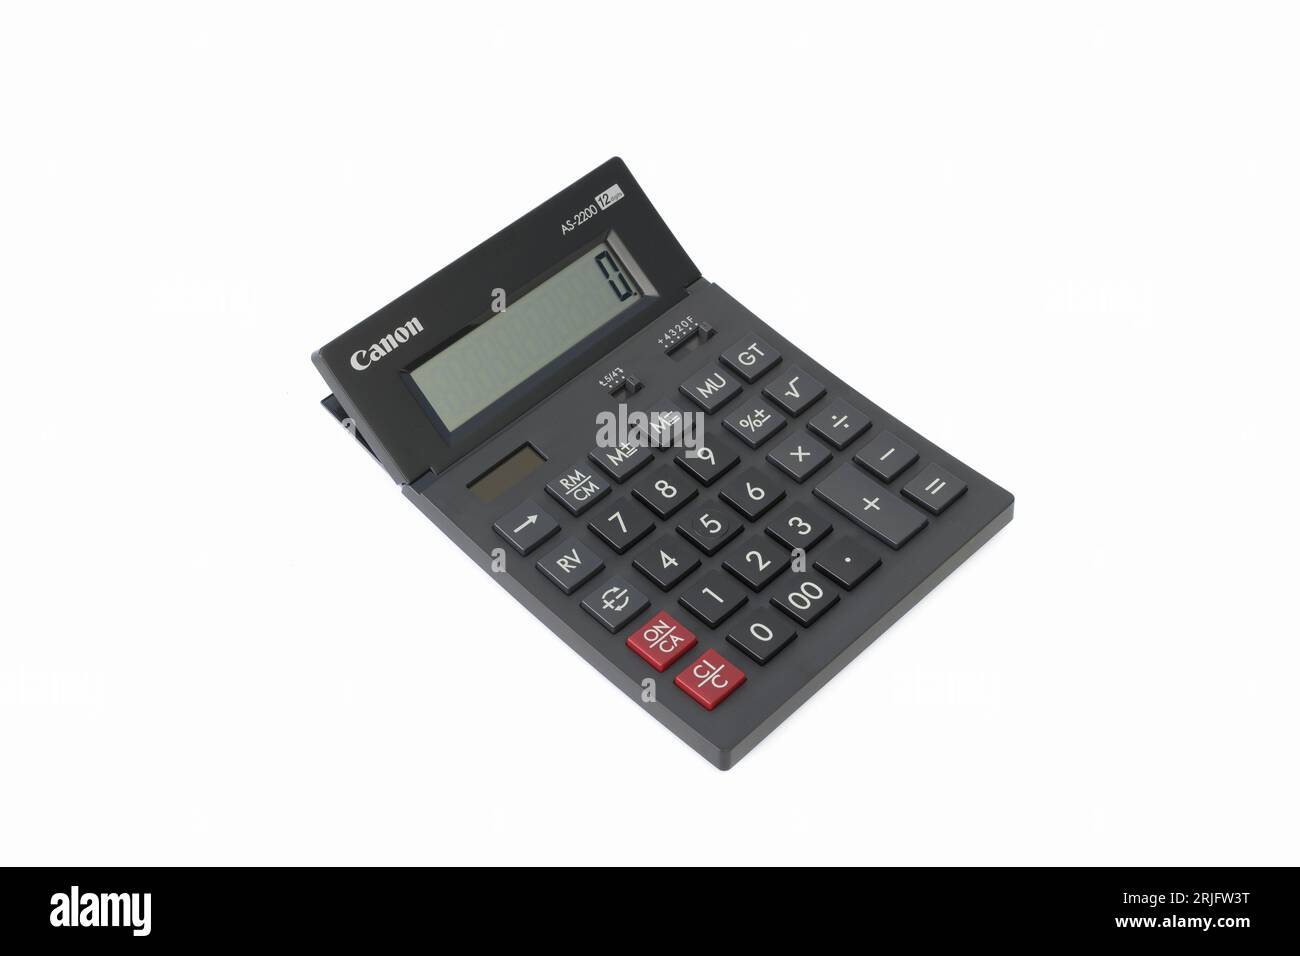 Hasselt.Limburg-Belgium 22-16-2023. Desktop calculator CANON AS-2200 on white background. Large buttons and lifting screen. Stock Photo